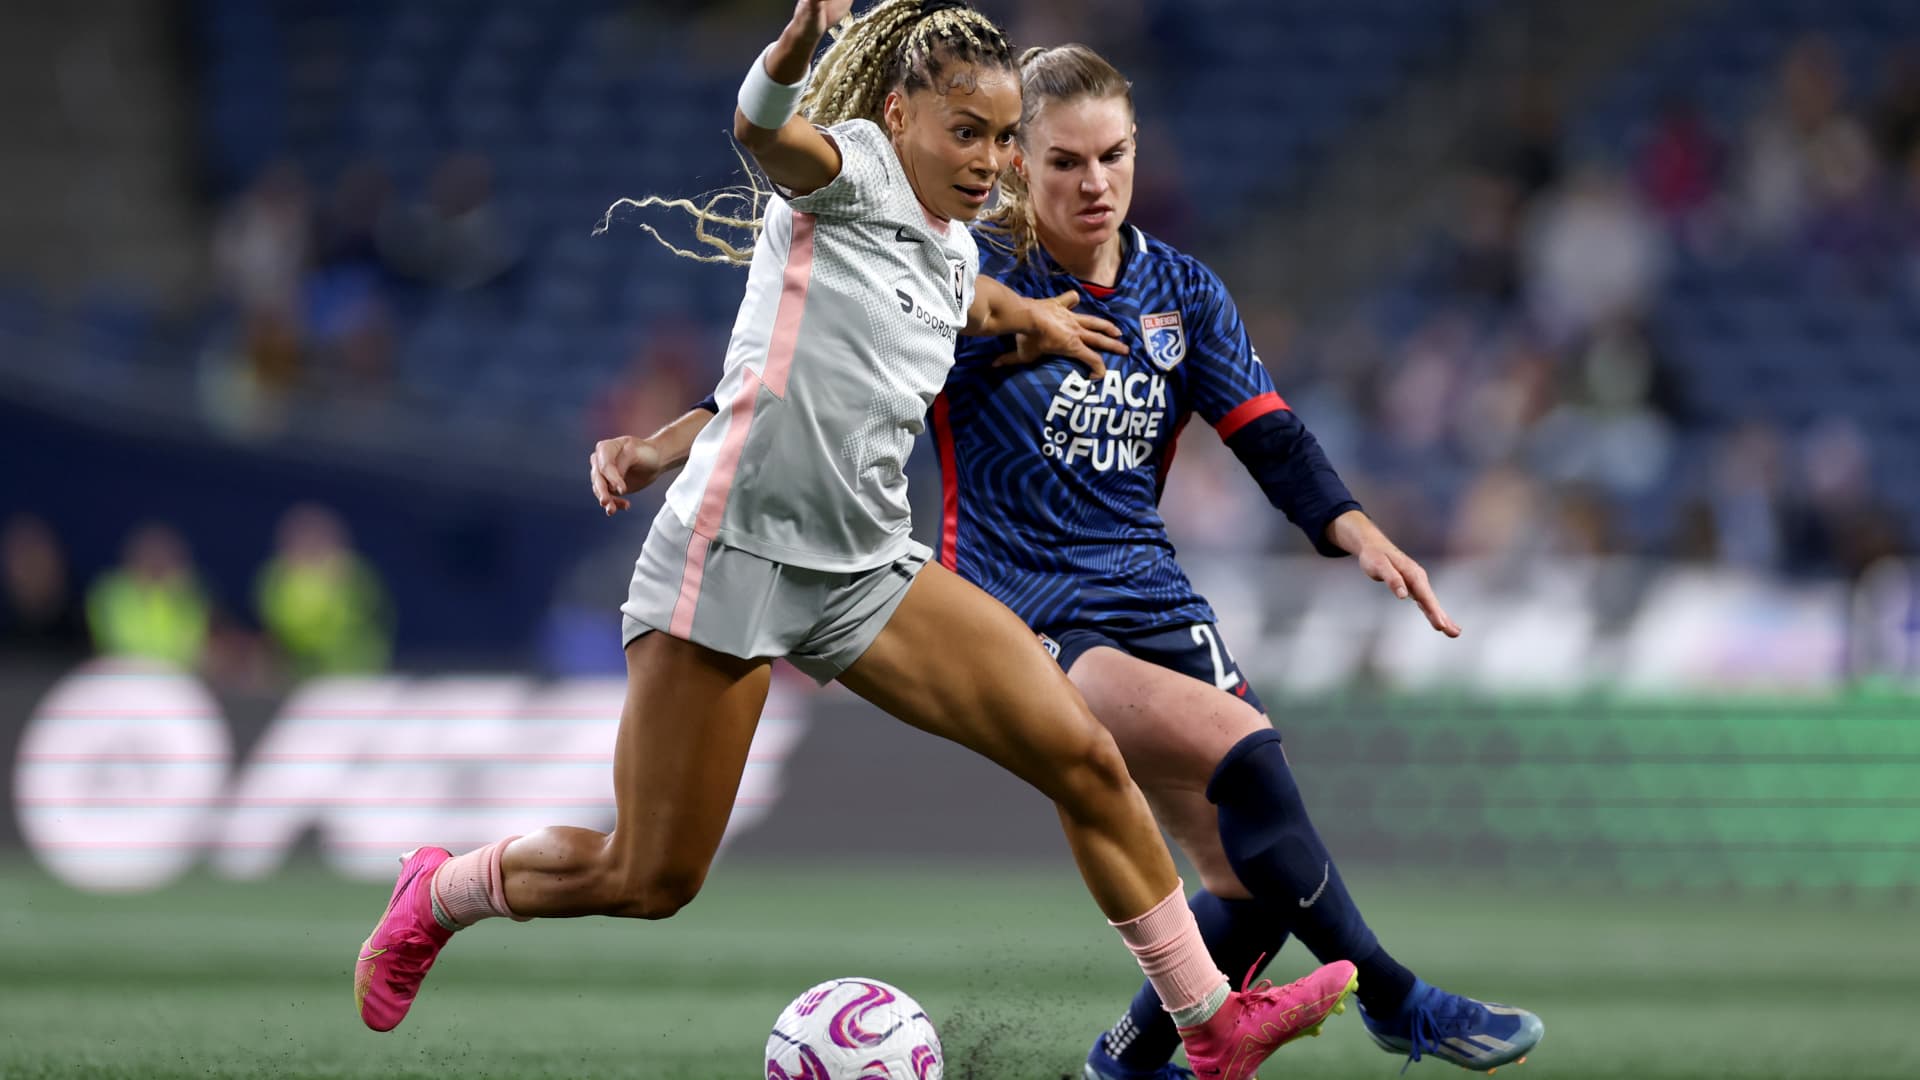 NWSL draws private equity interest as team valuations rise